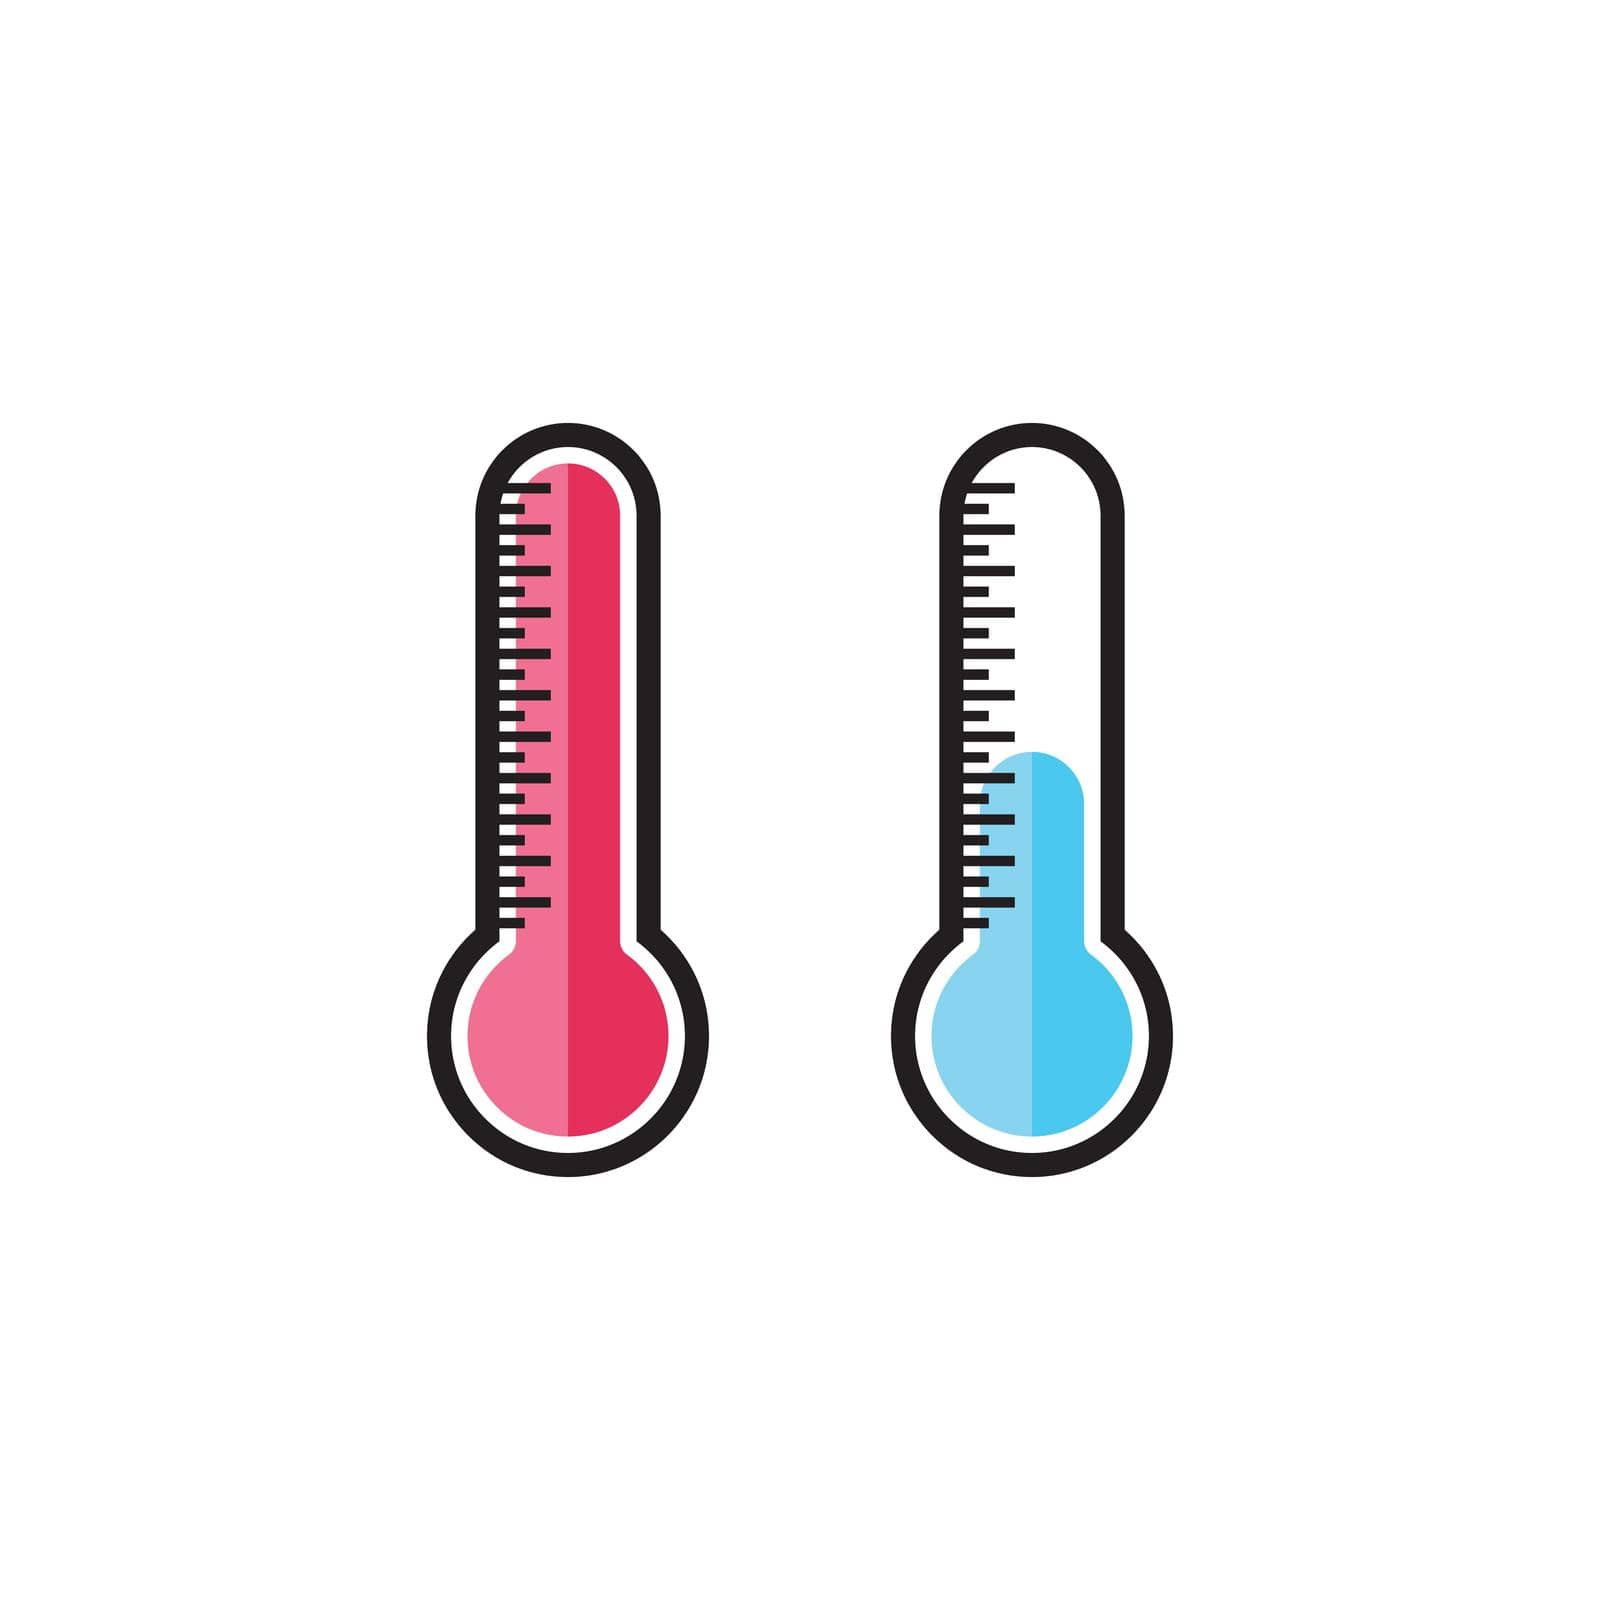 Thermometer vector icon illustration by Attades19